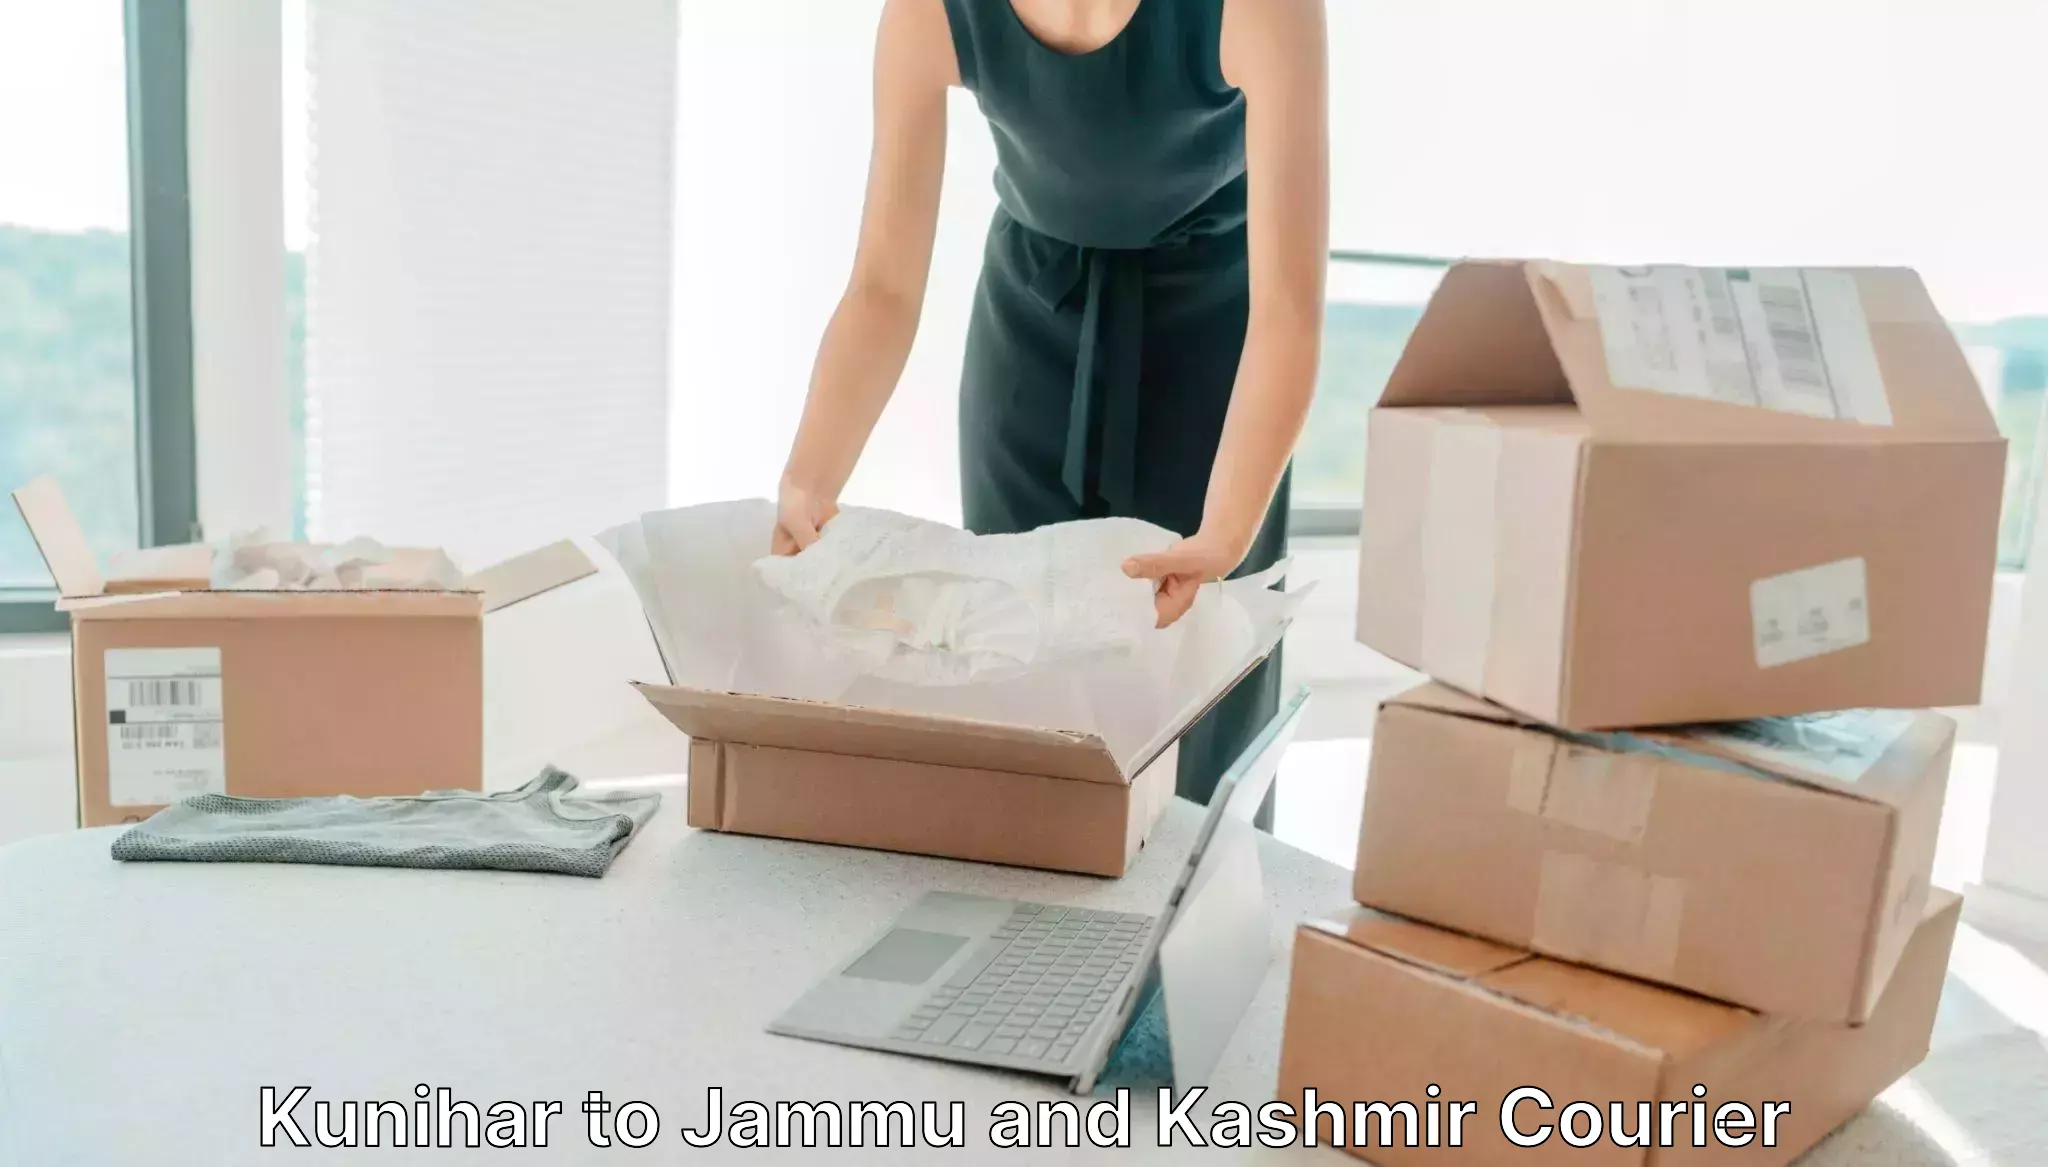 Express delivery network Kunihar to Ramban